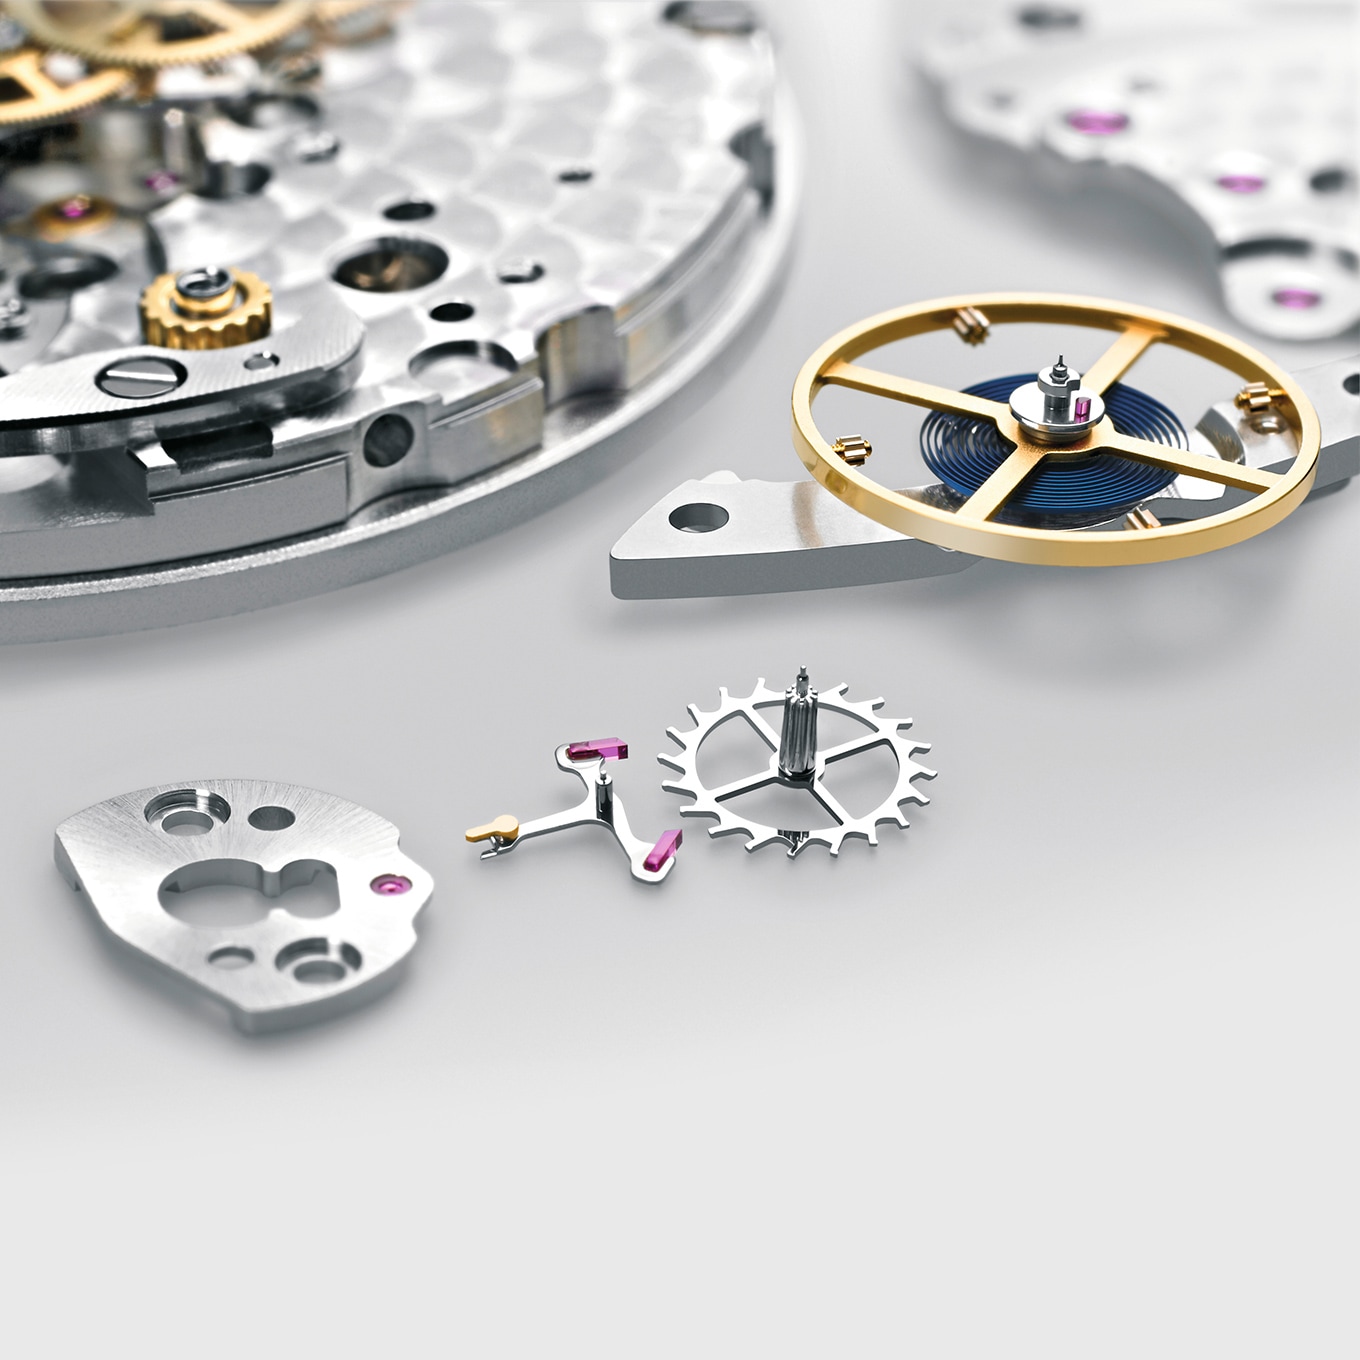 Oyster Perpetual Movement - Rolex 